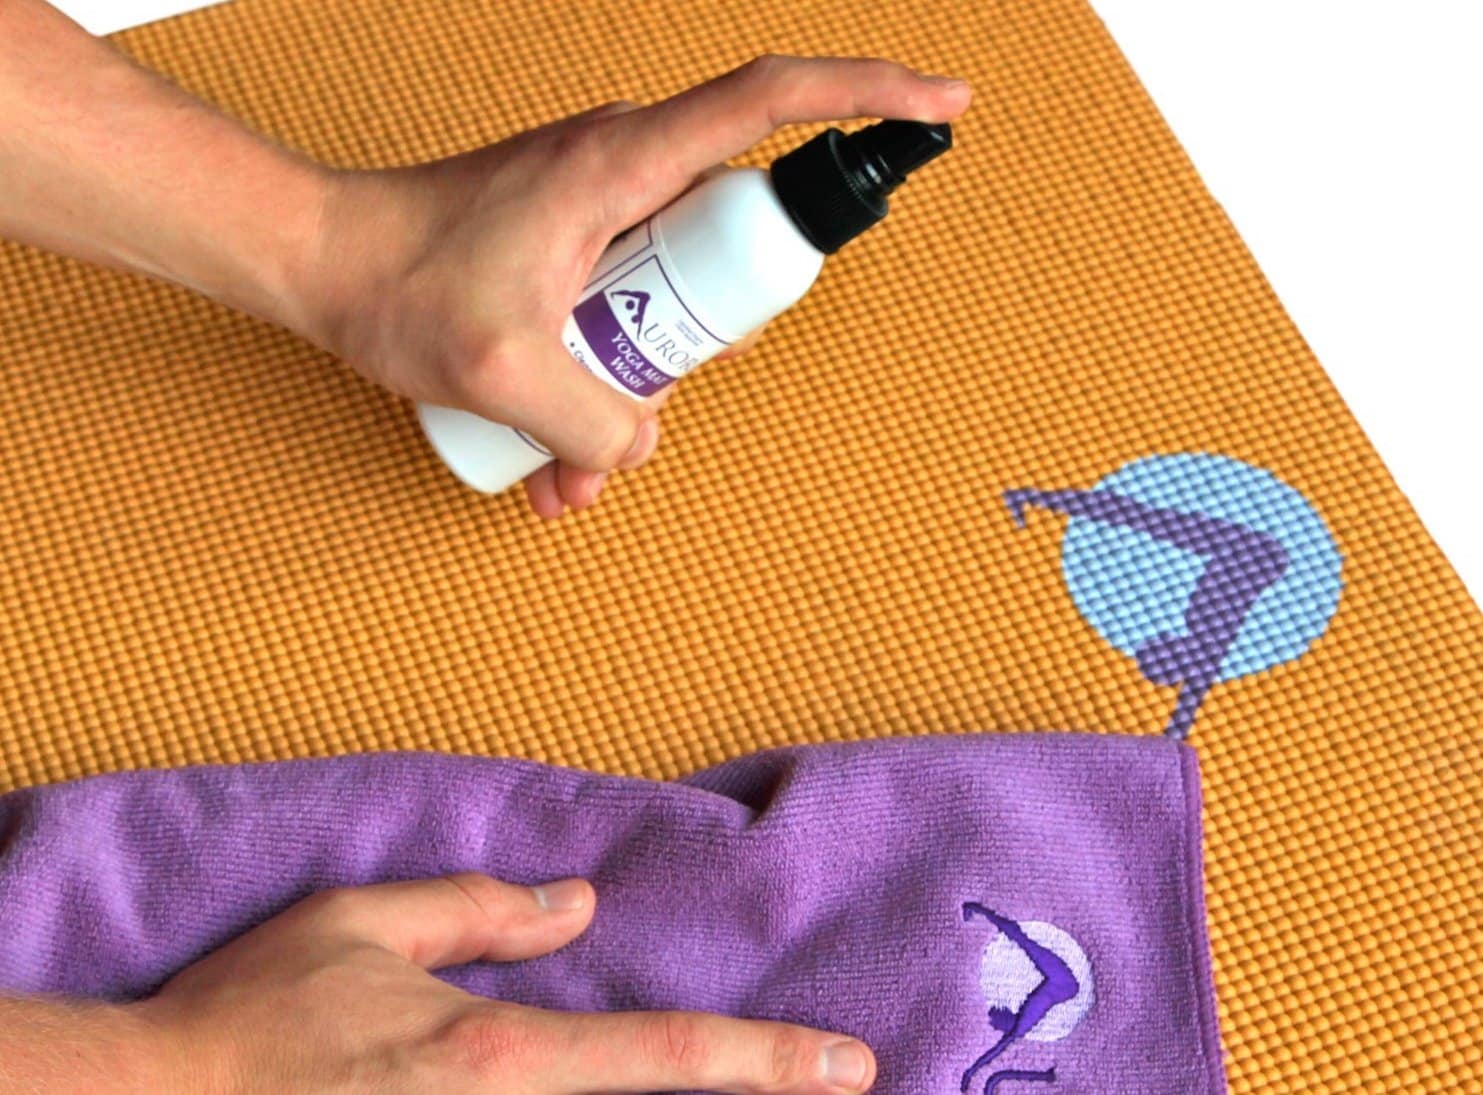 Top 10 Best Yoga Mat Cleaning Sprays in 2022 - Best Reviews Guide.